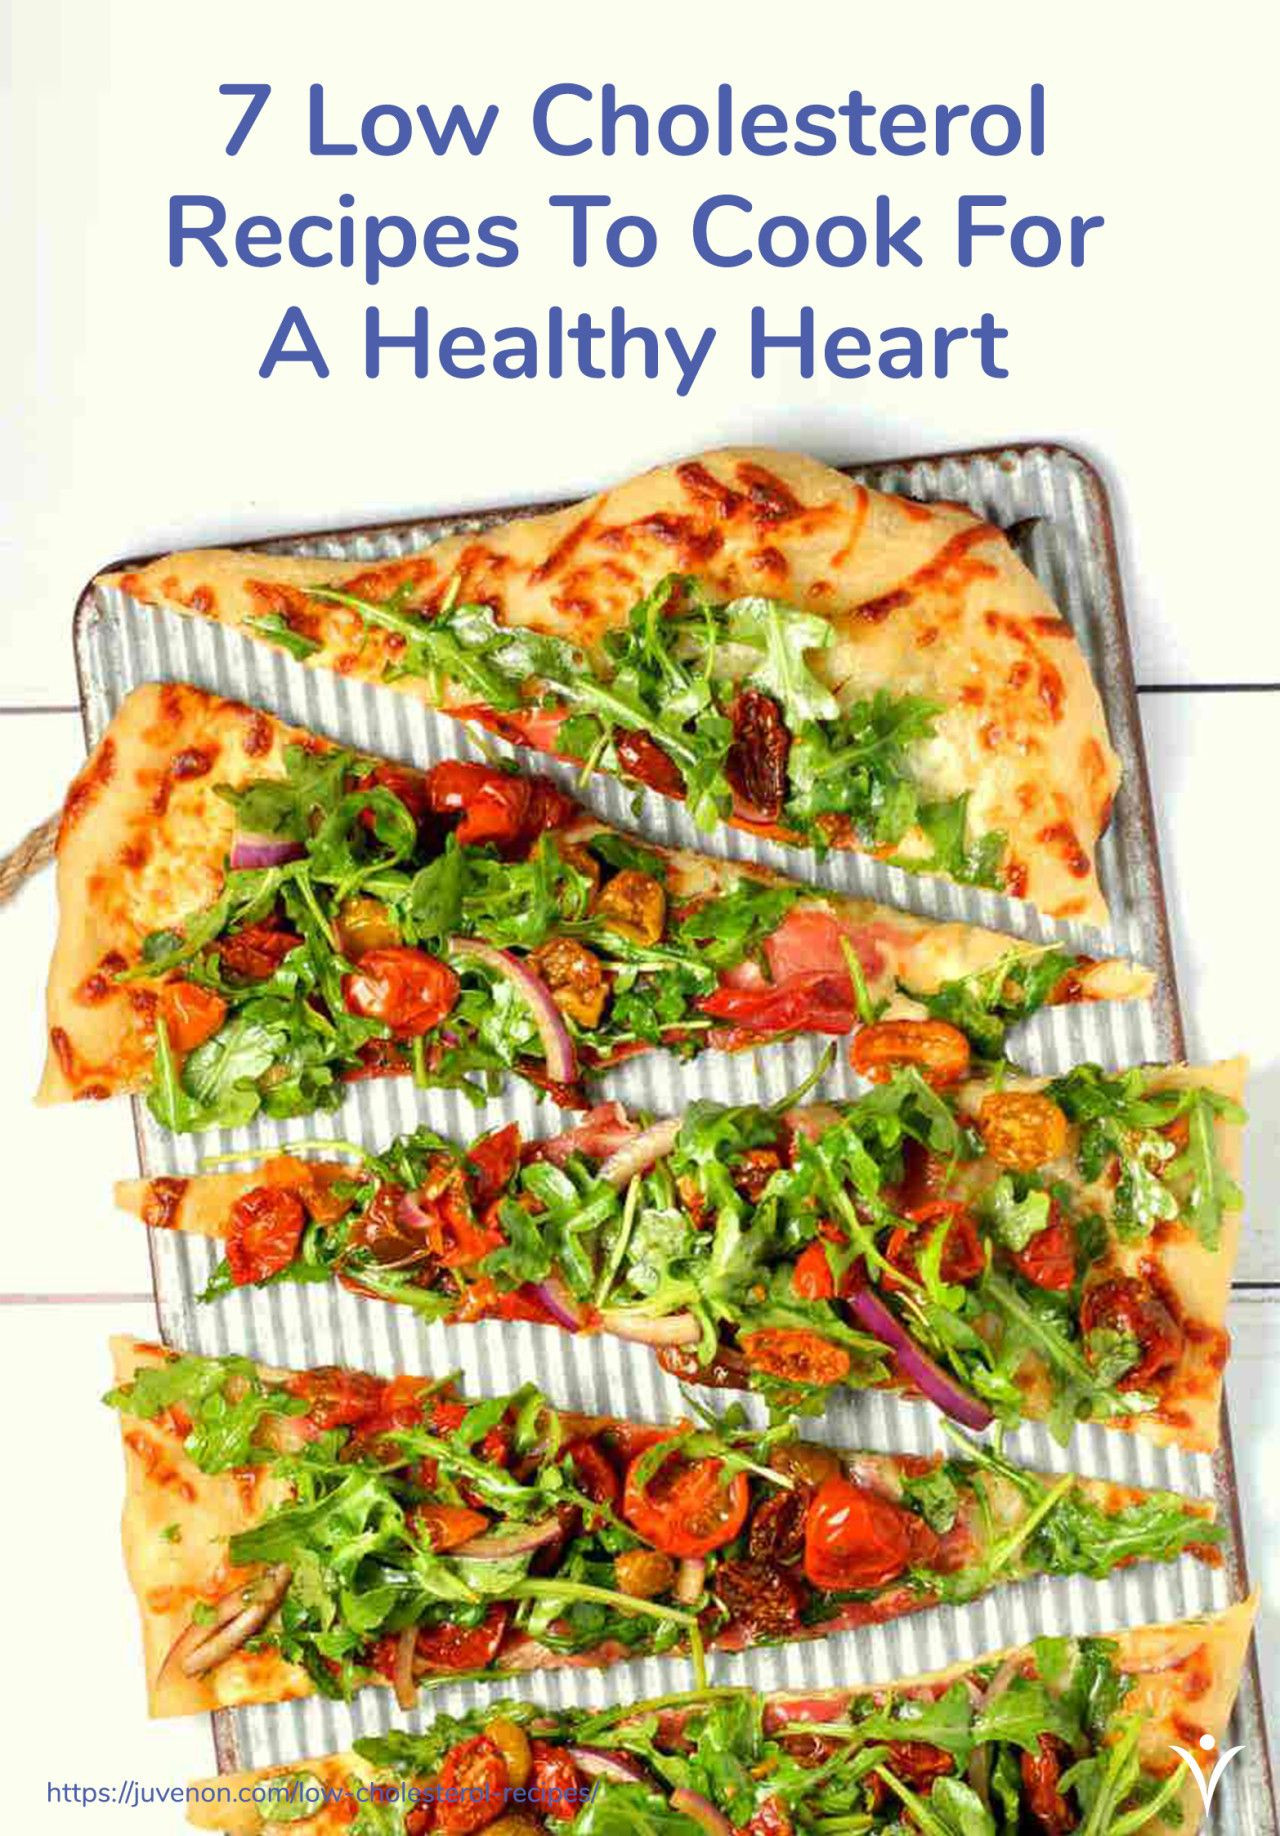 Low Cholesterol Recipes For Dinner
 7 Low Cholesterol Recipes To Cook For A Healthy Heart